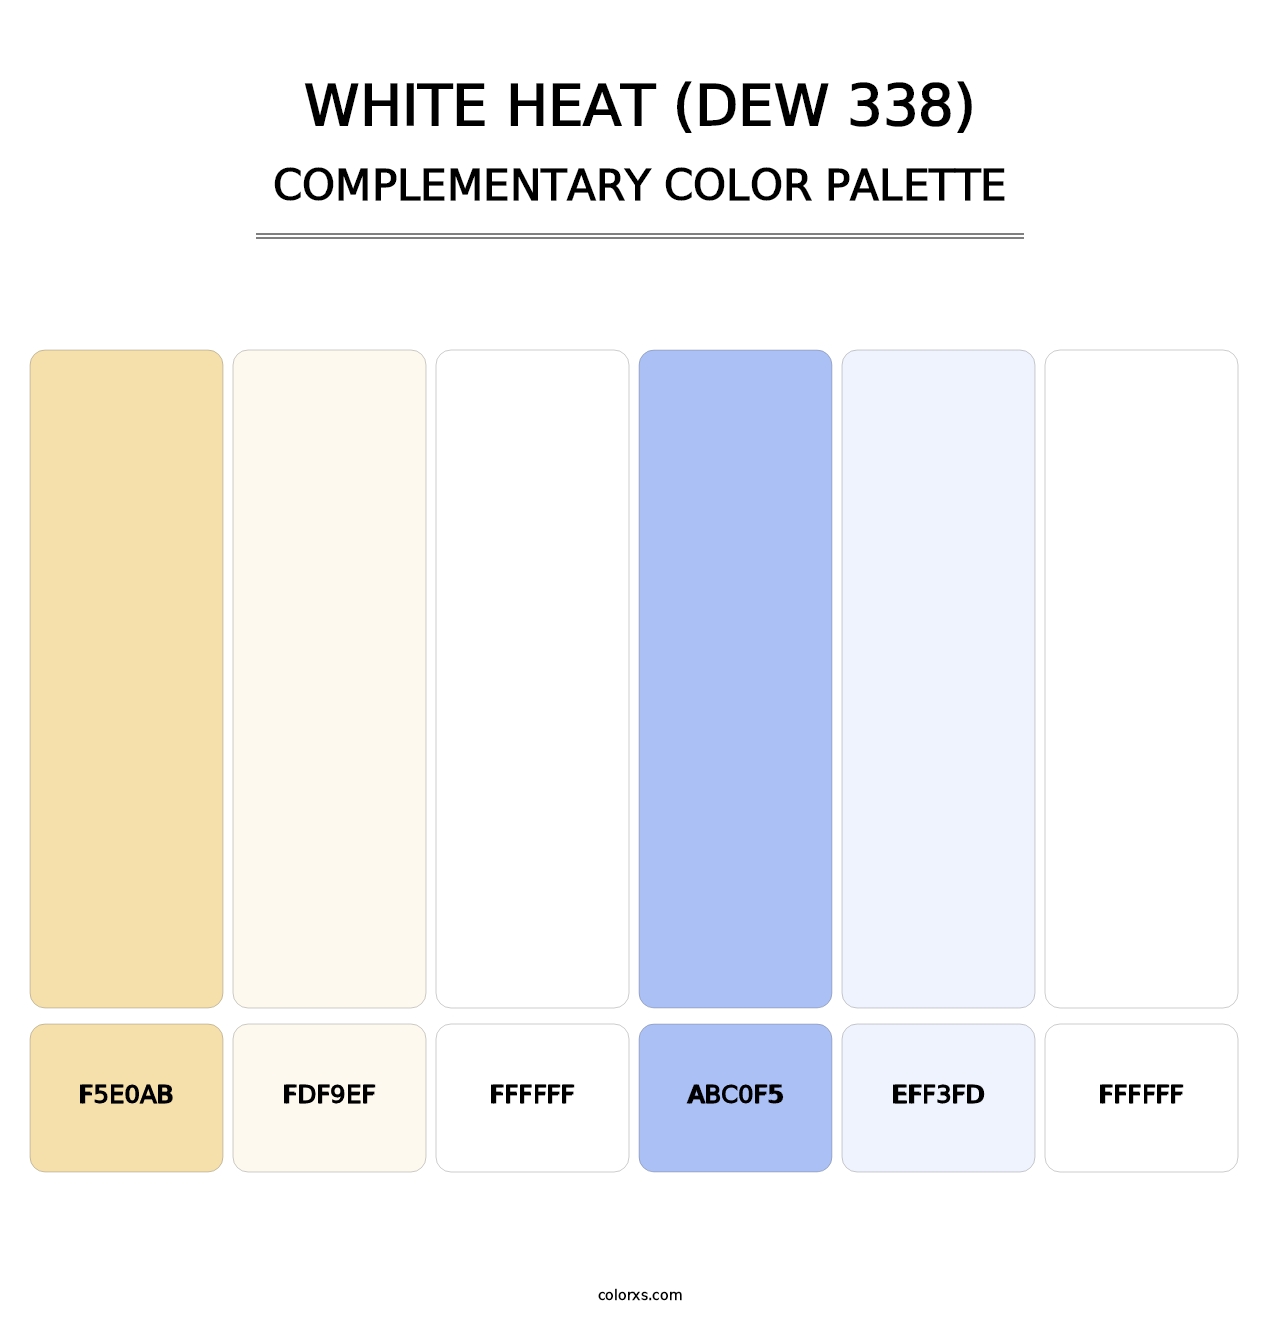 White Heat (DEW 338) - Complementary Color Palette